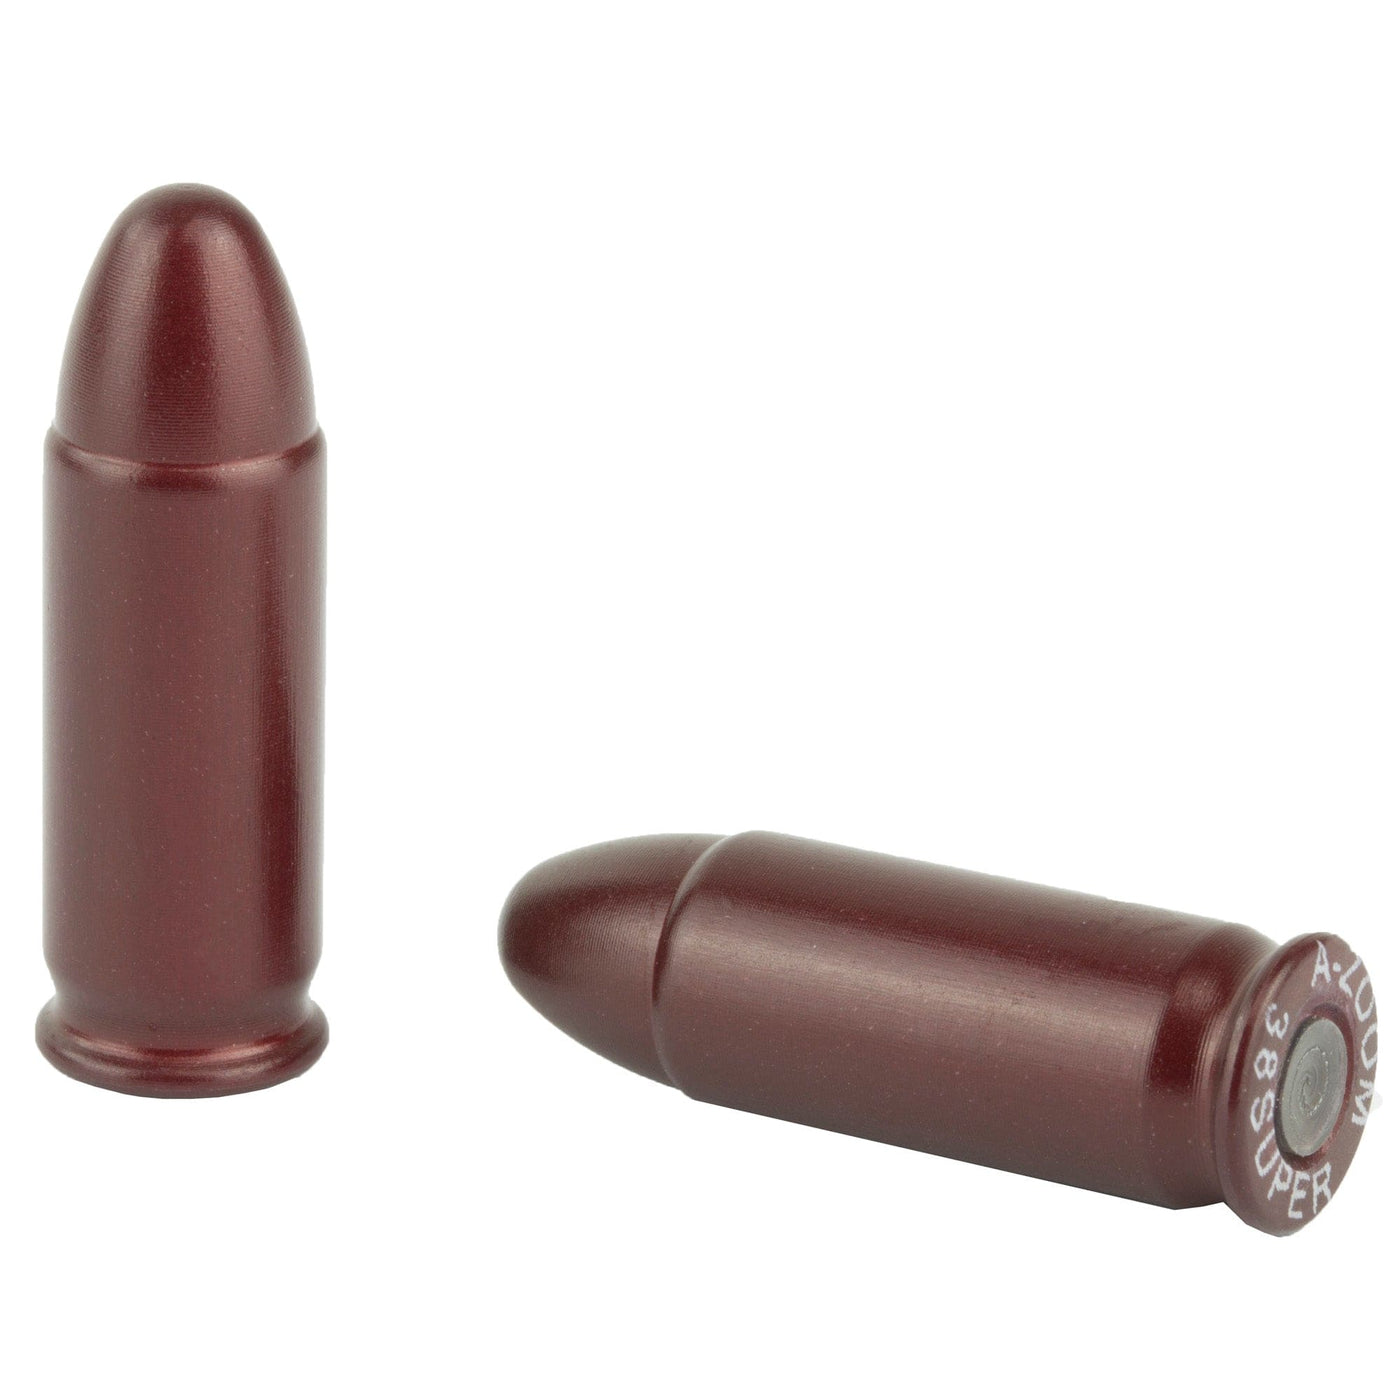 A-Zoom A-zoom Metal Snap Cap - .38 Super 5-pack Ammo